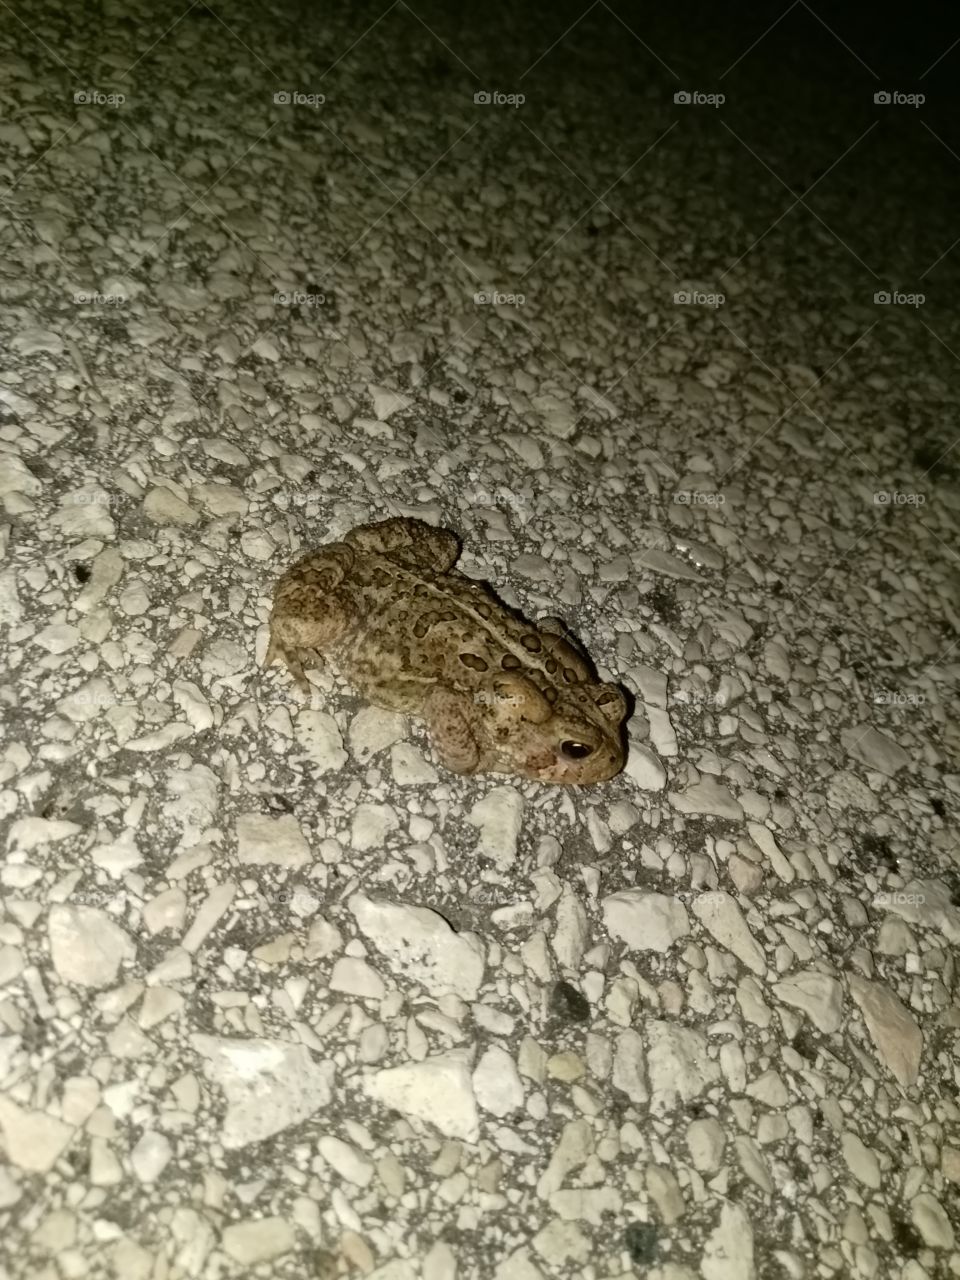 Toad's night out